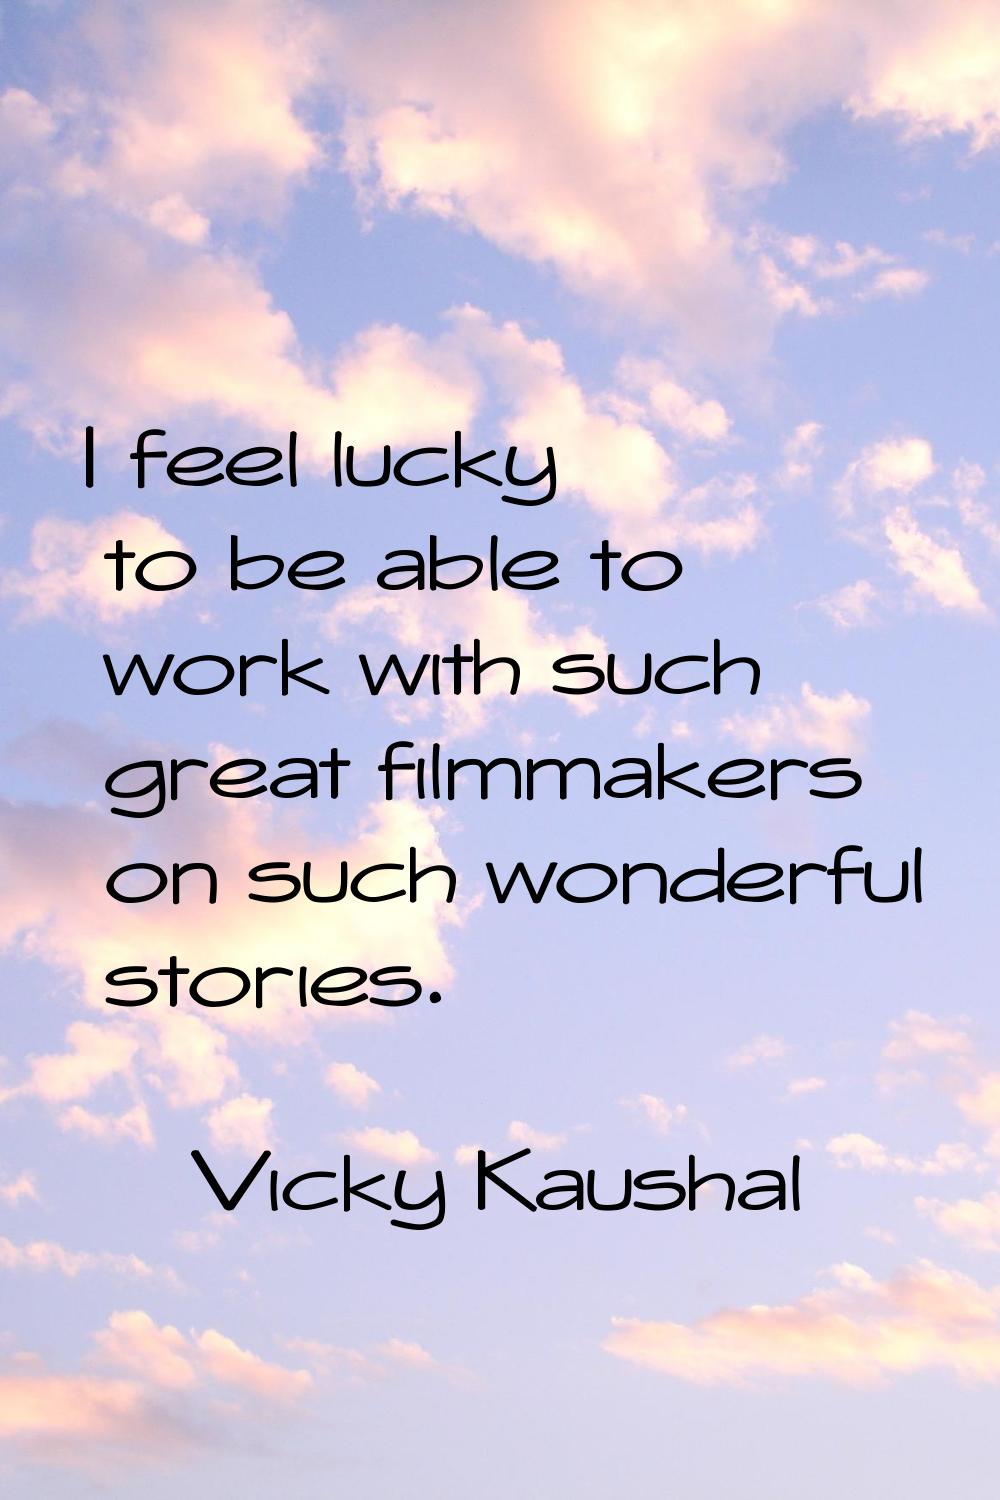 I feel lucky to be able to work with such great filmmakers on such wonderful stories.